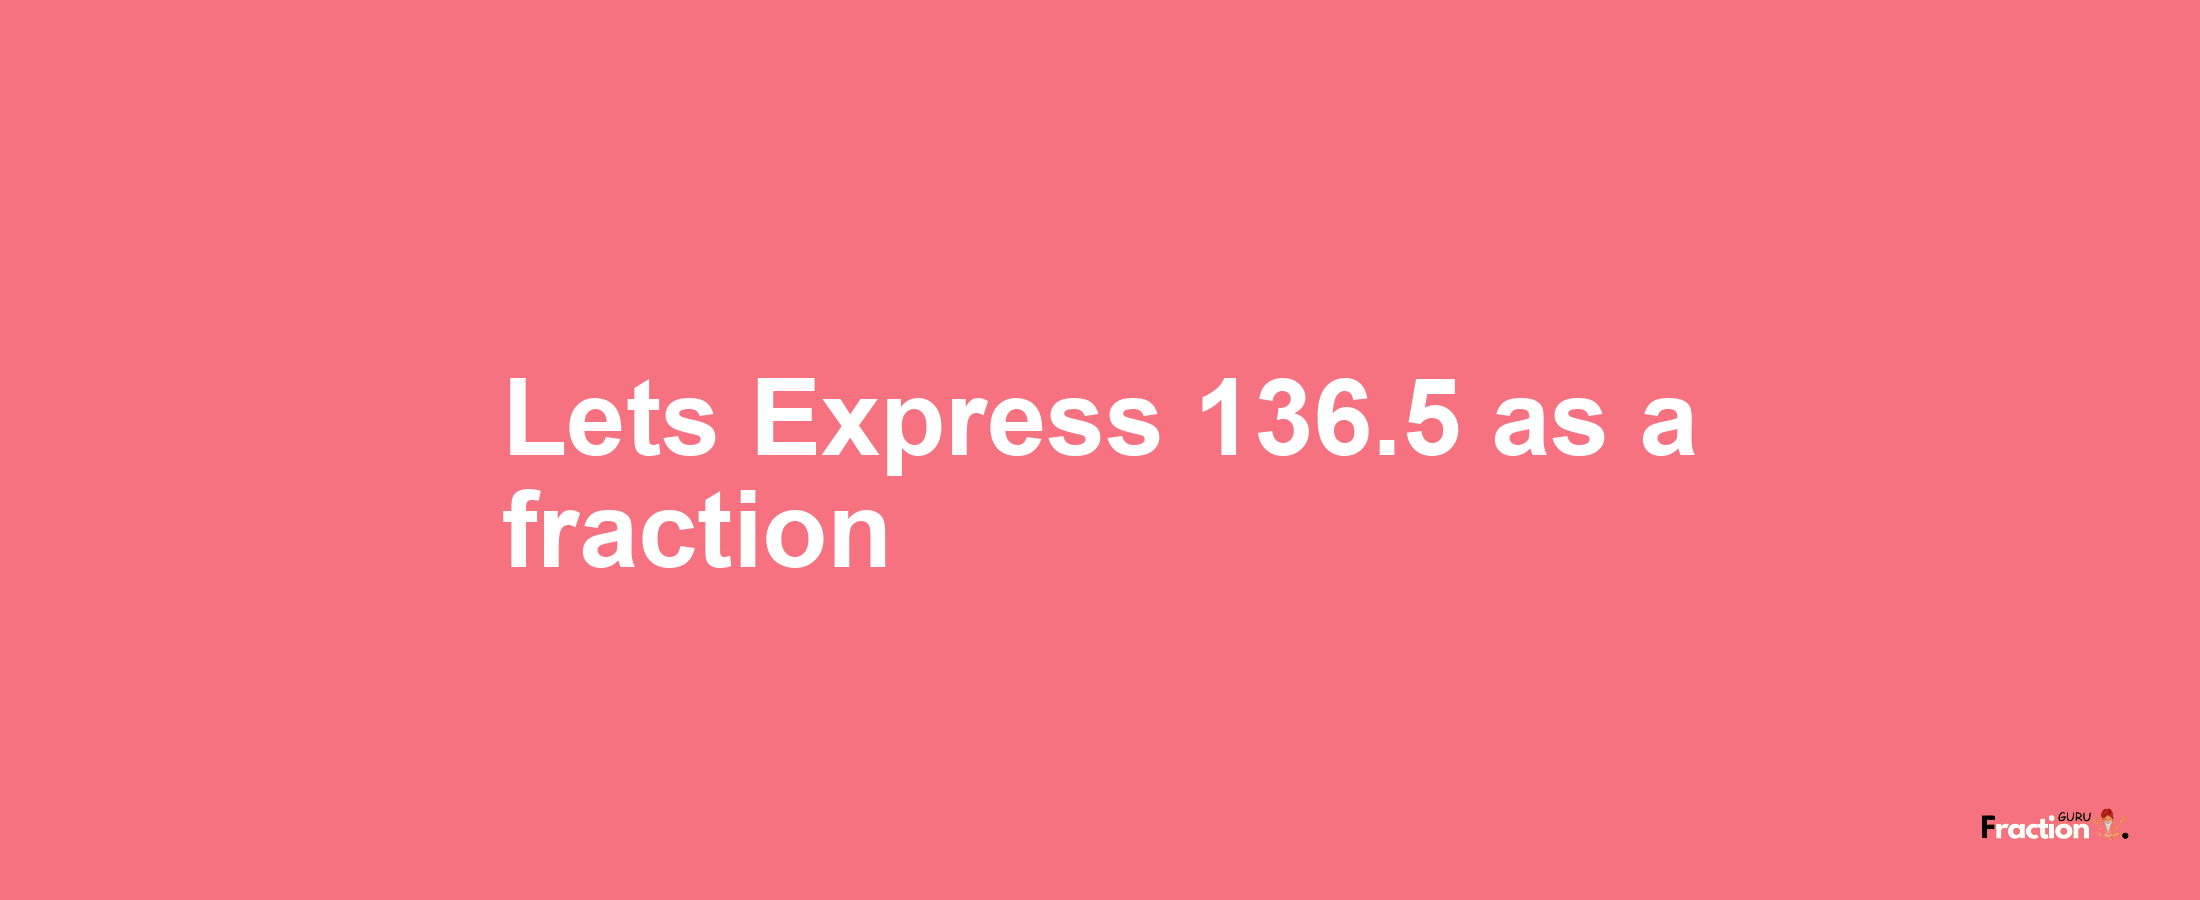 Lets Express 136.5 as afraction